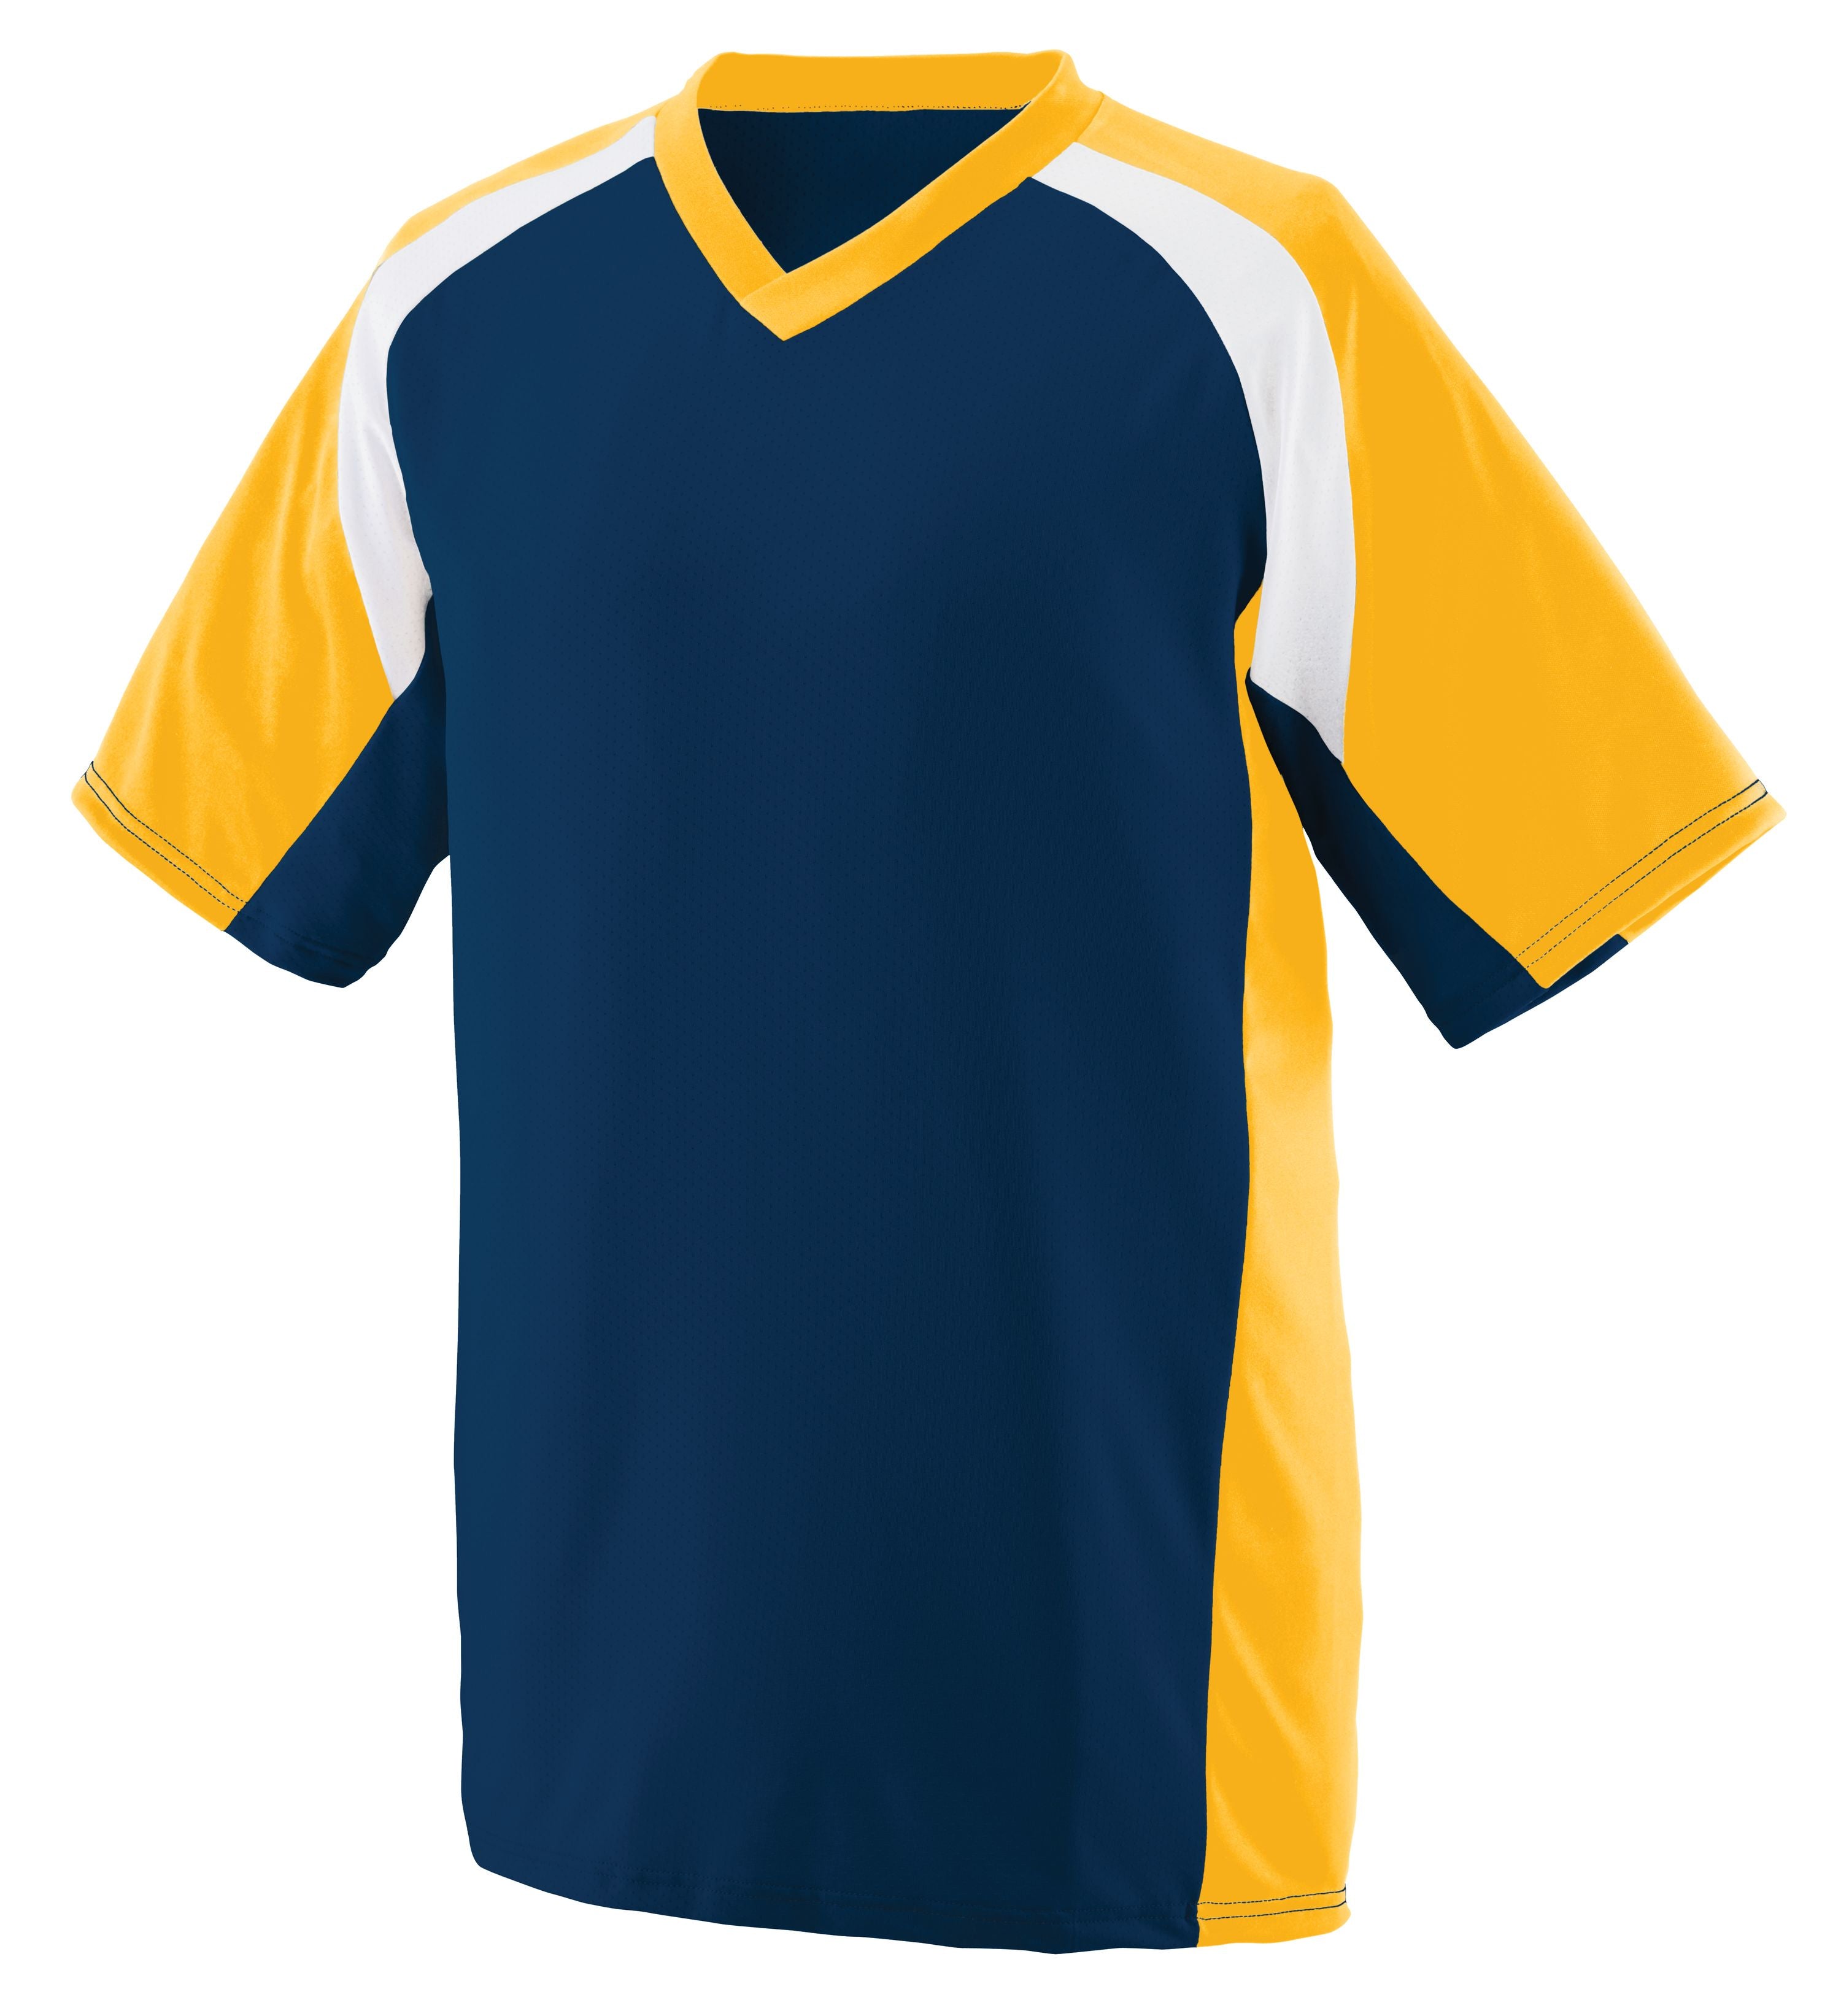 Augusta Sportswear Nitro Jersey in Navy/Gold/White  -Part of the Adult, Adult-Jersey, Augusta-Products, Football, Shirts, All-Sports, All-Sports-1 product lines at KanaleyCreations.com